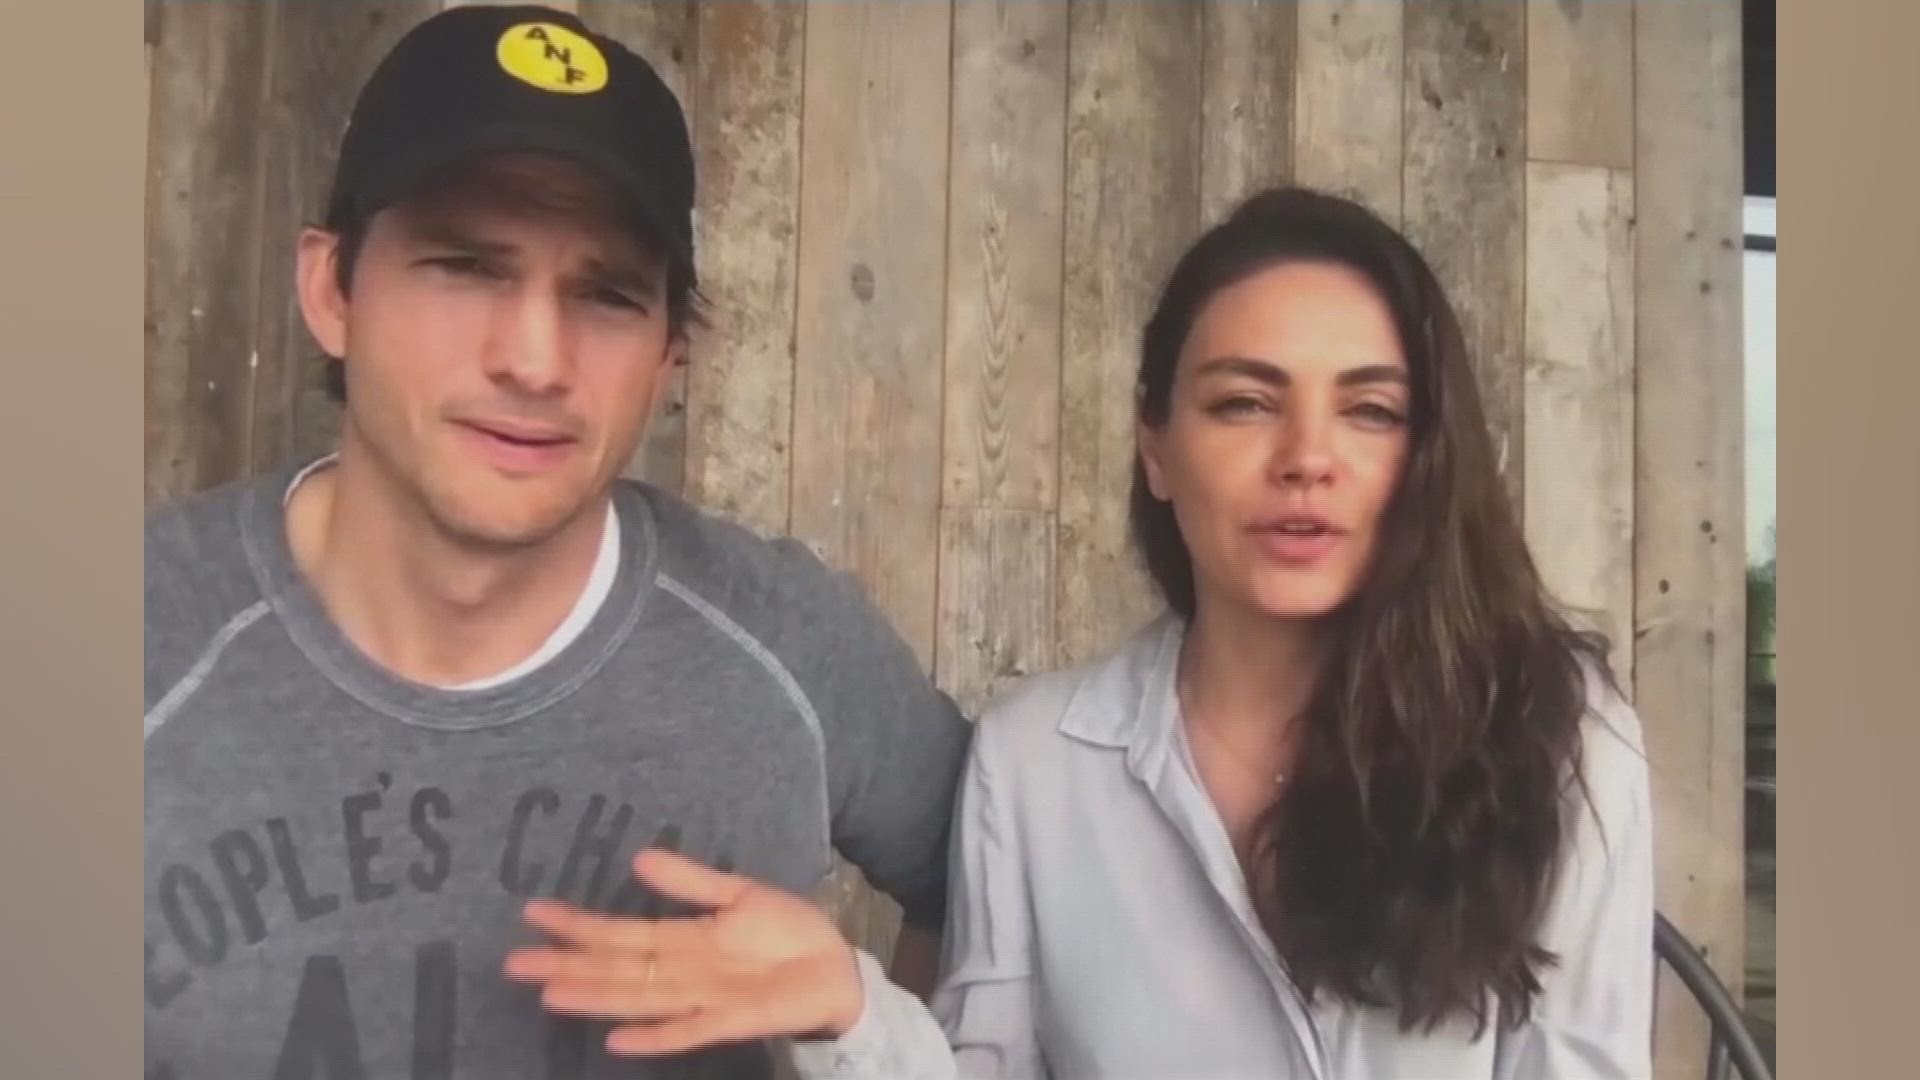 Ukraine-born actor Mila Kunis and her husband Ashton Kutcher are matching up to $3 million in donations to help refugees fleeing the bloodshed in Ukraine.